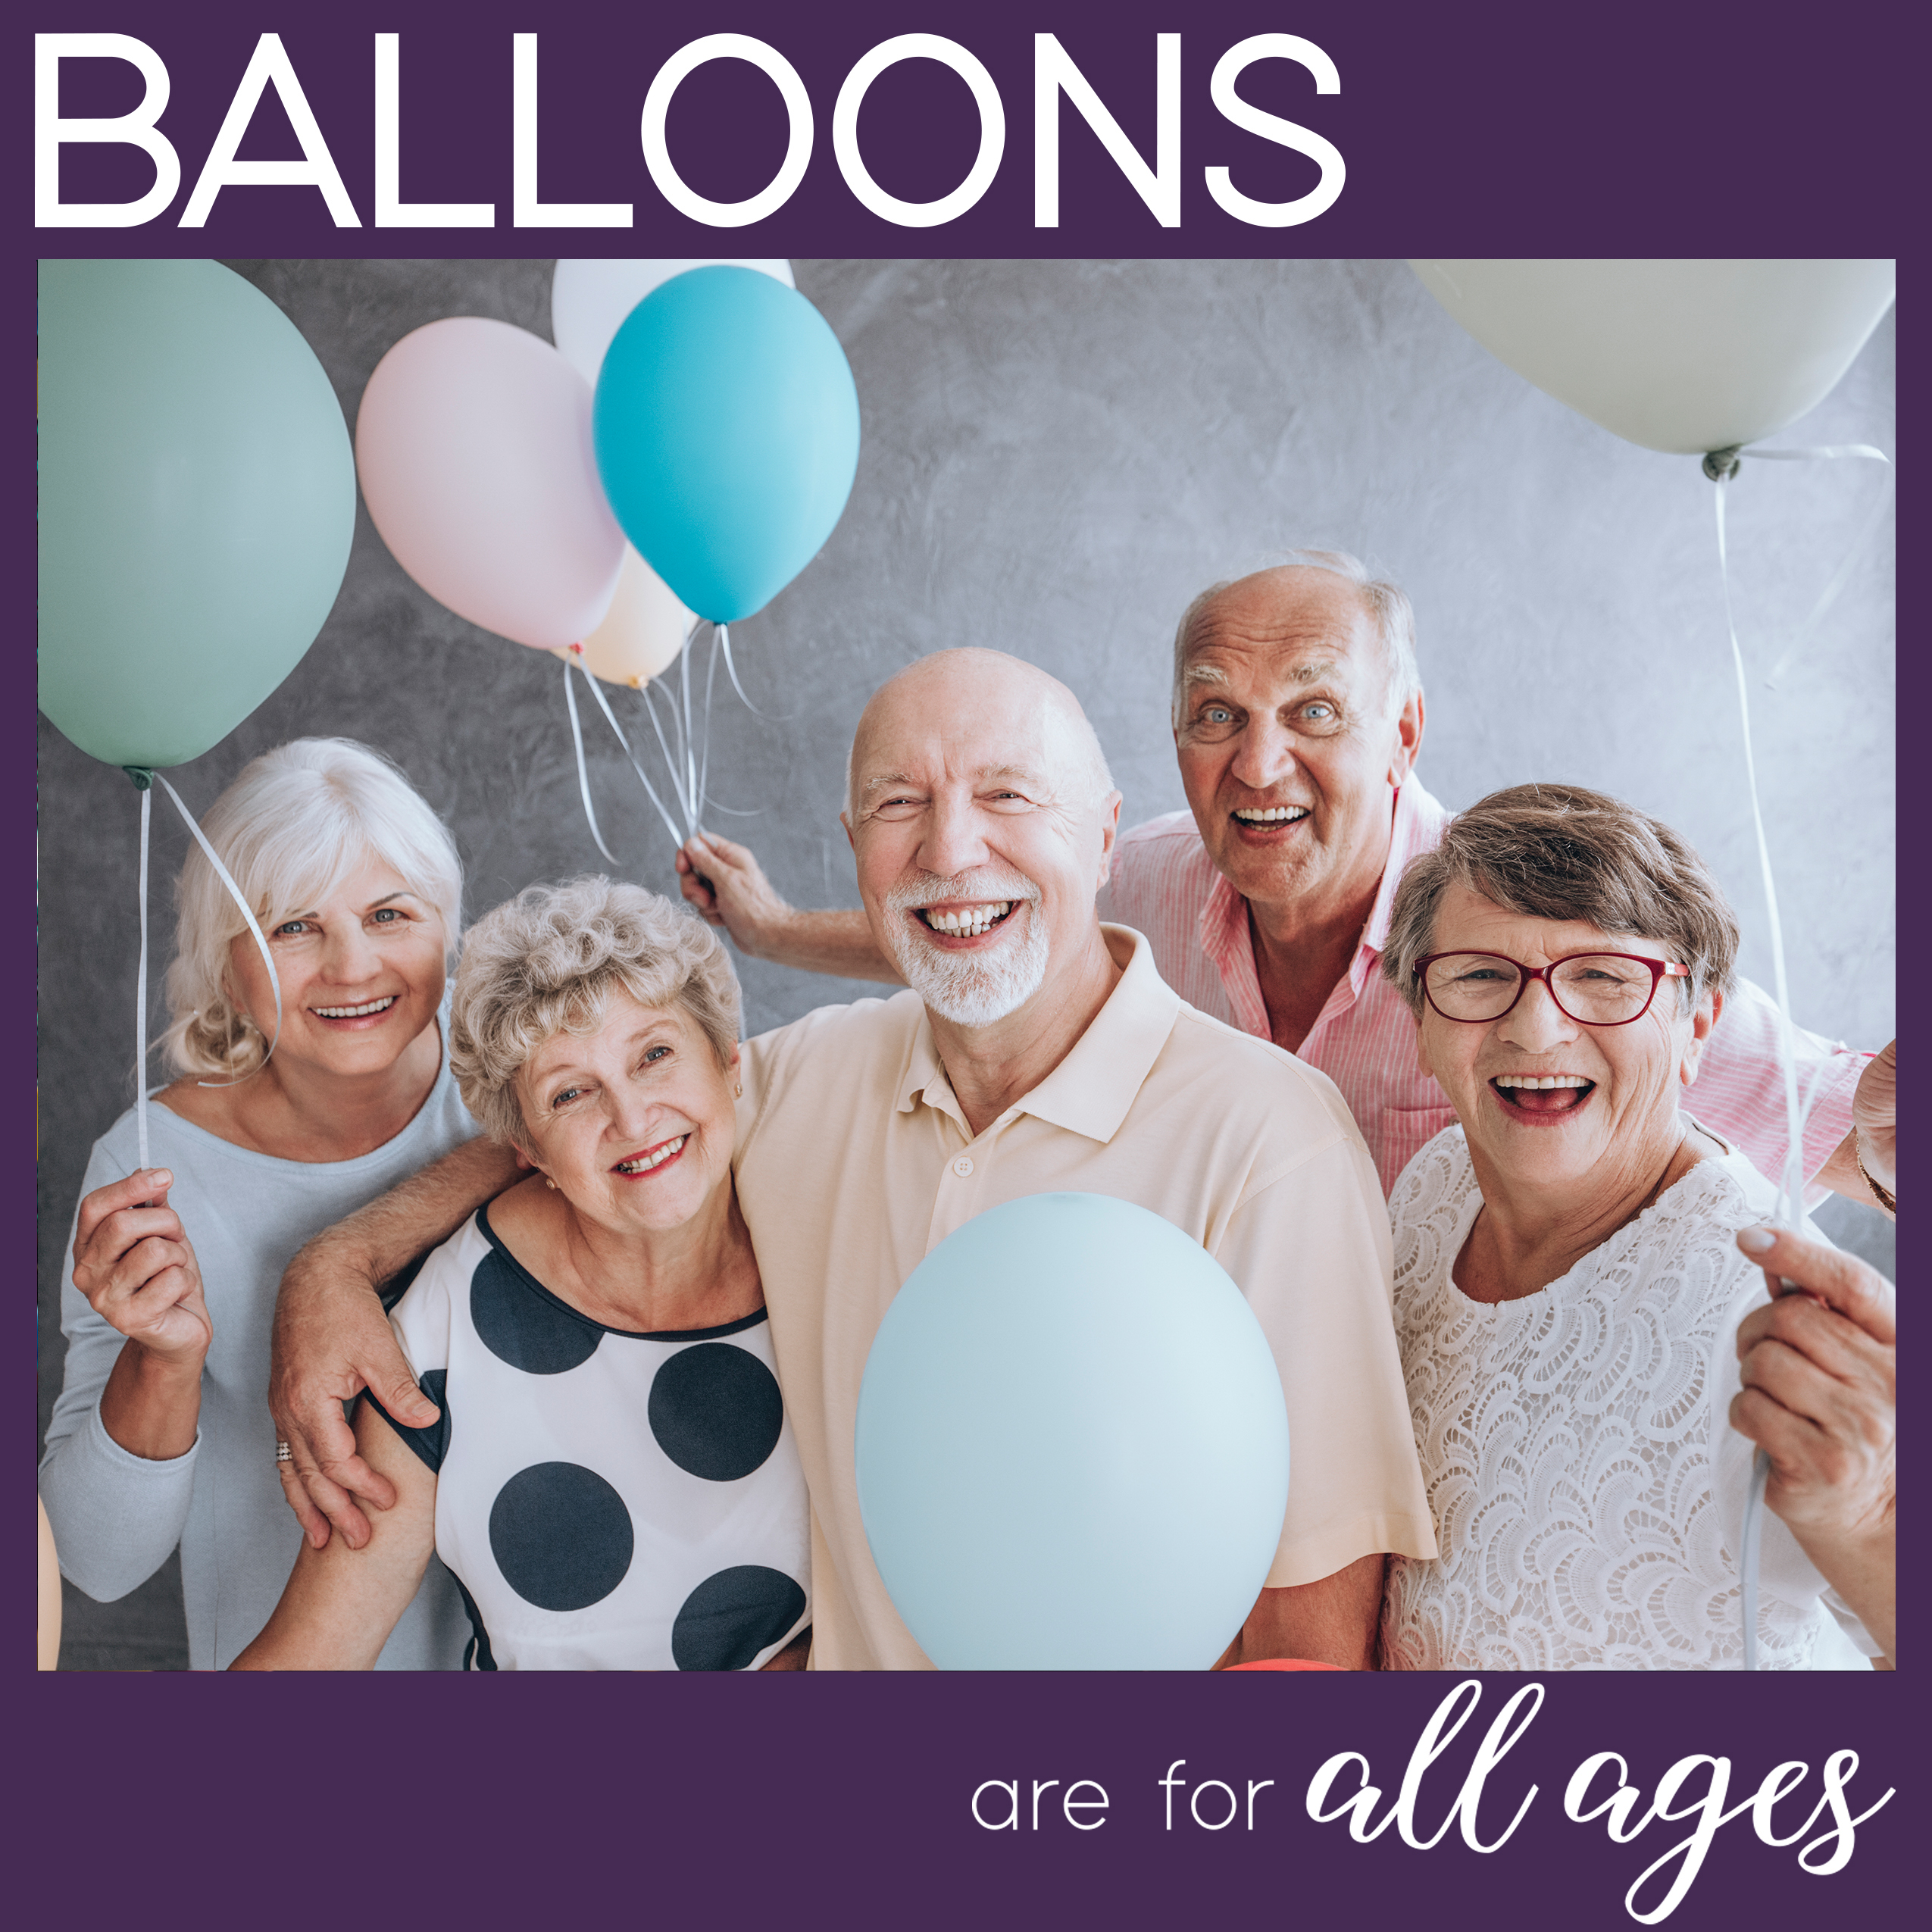 Balloon Facts - Balloons are for all ages